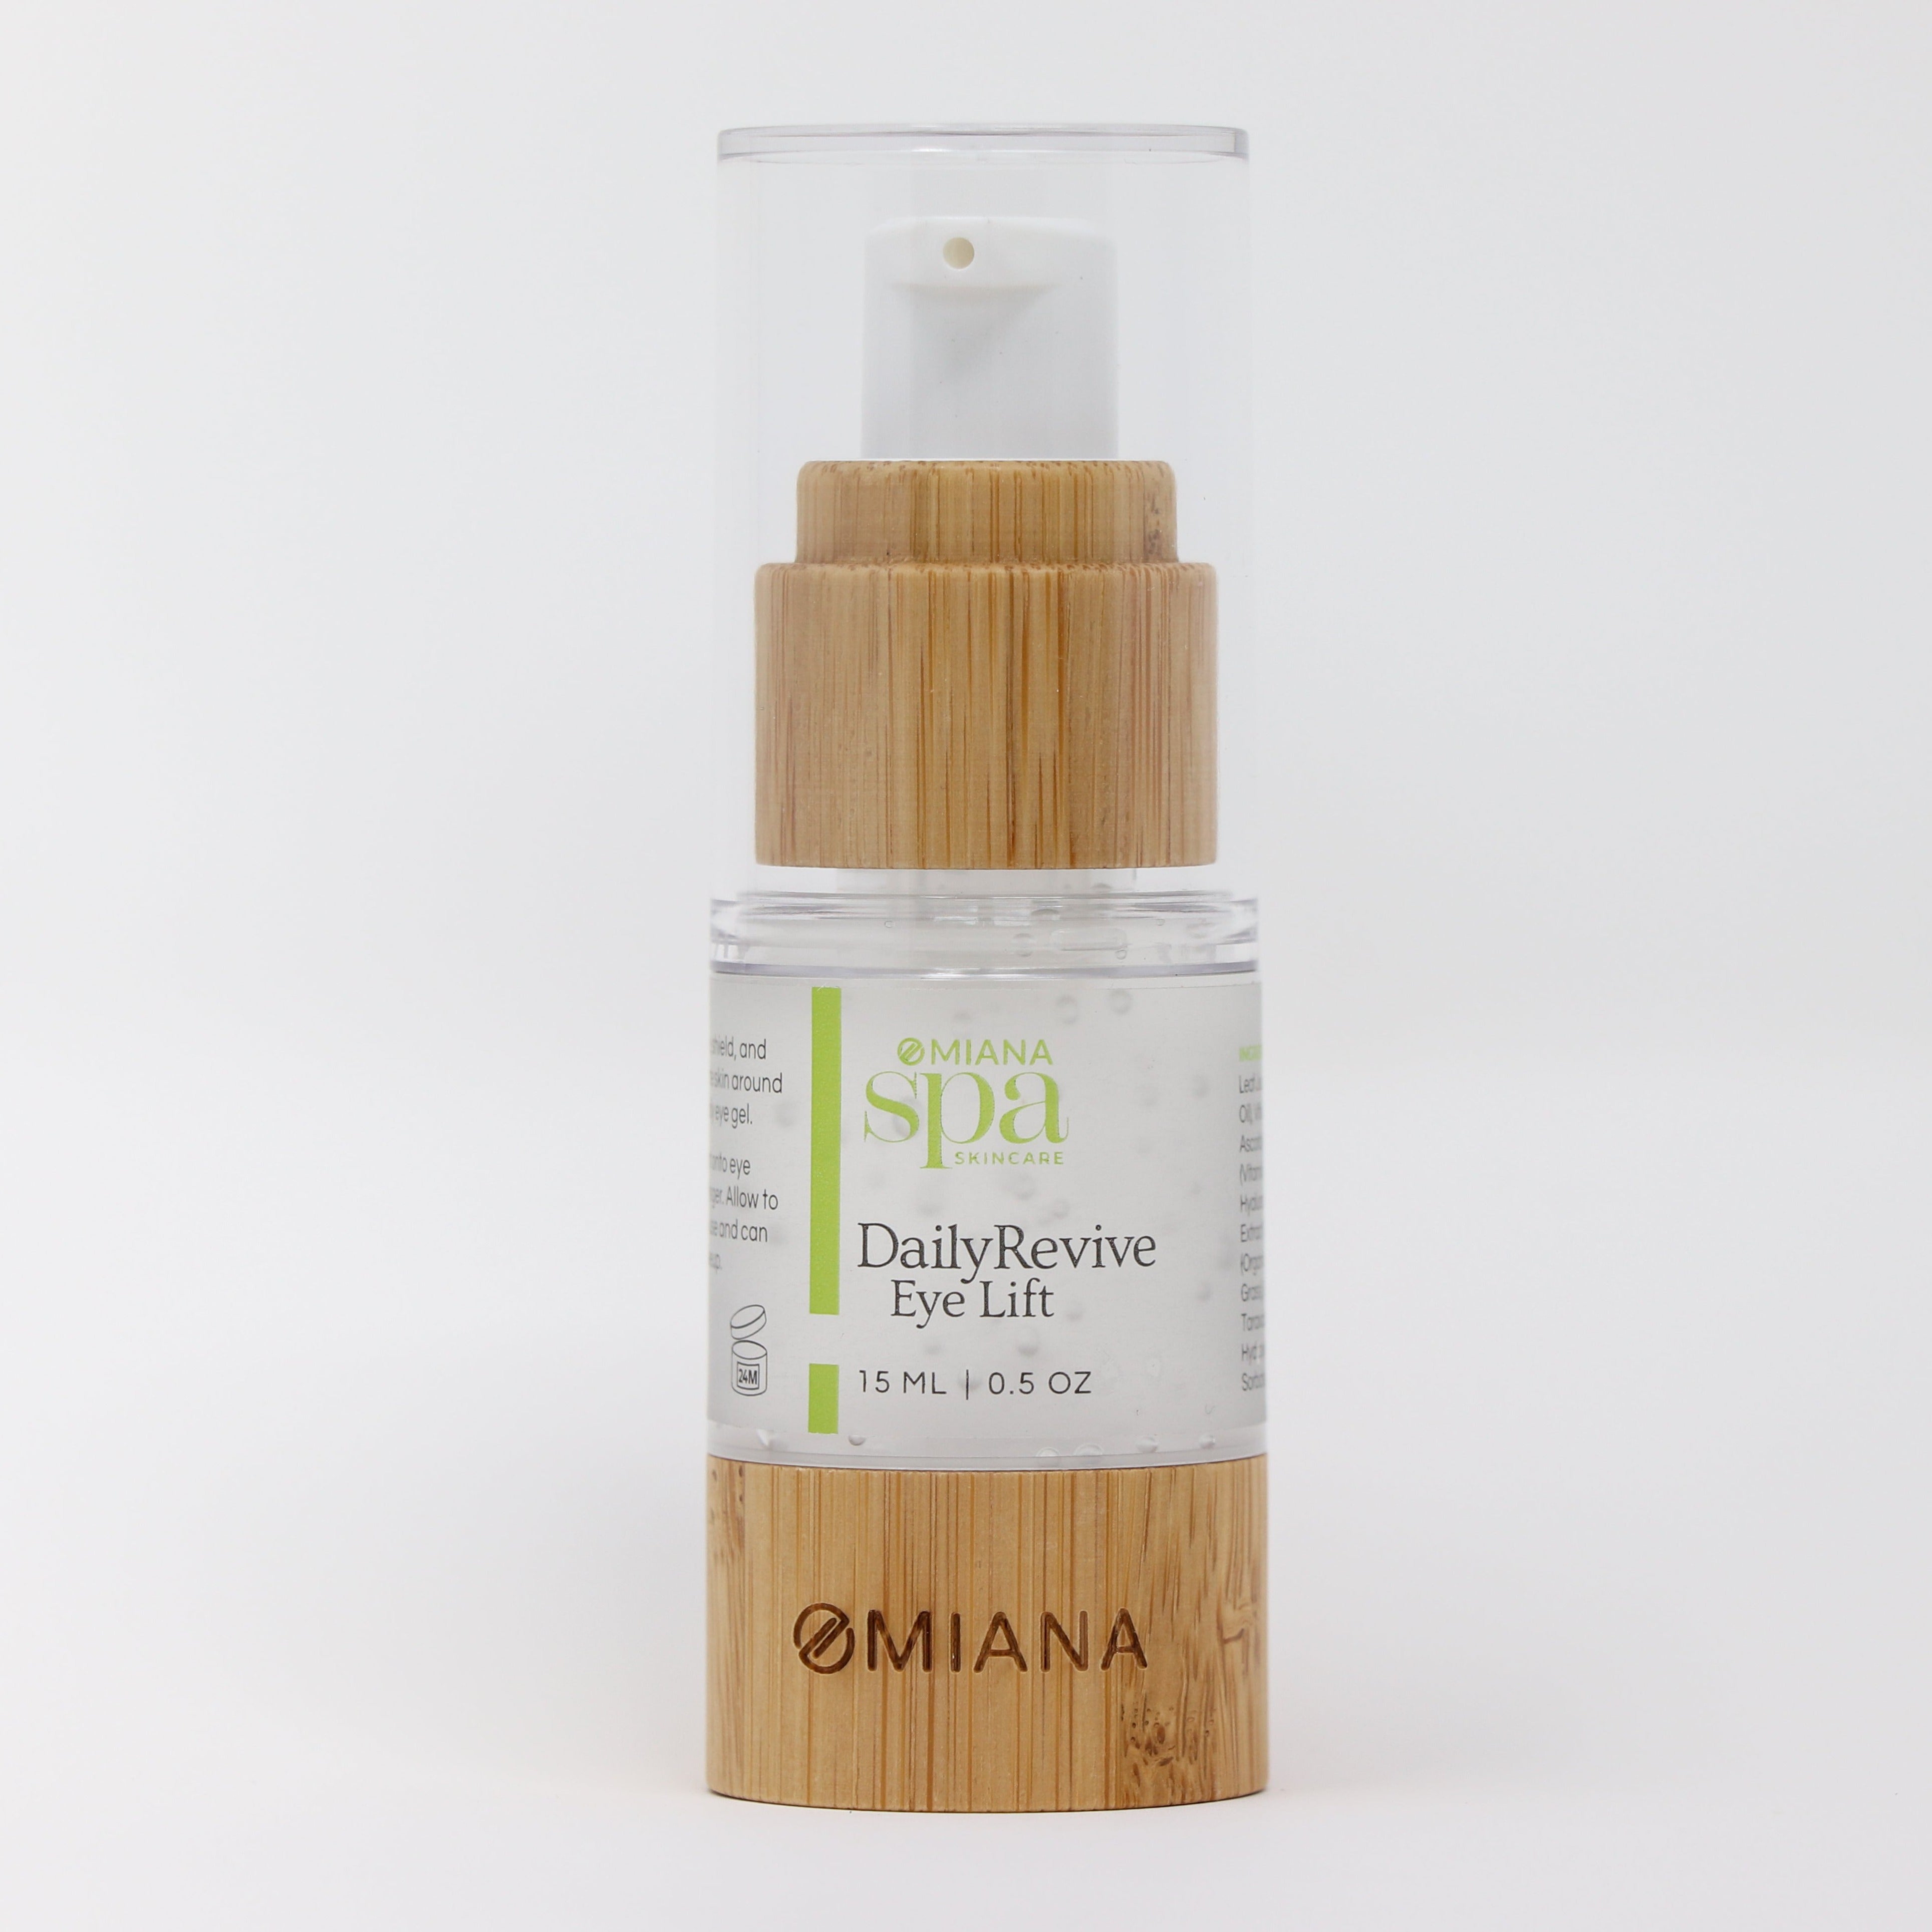 DailyRevive Eye Lift - 100% Free From GMOs, Toxins, Artificial Fragrances, & More by Omiana